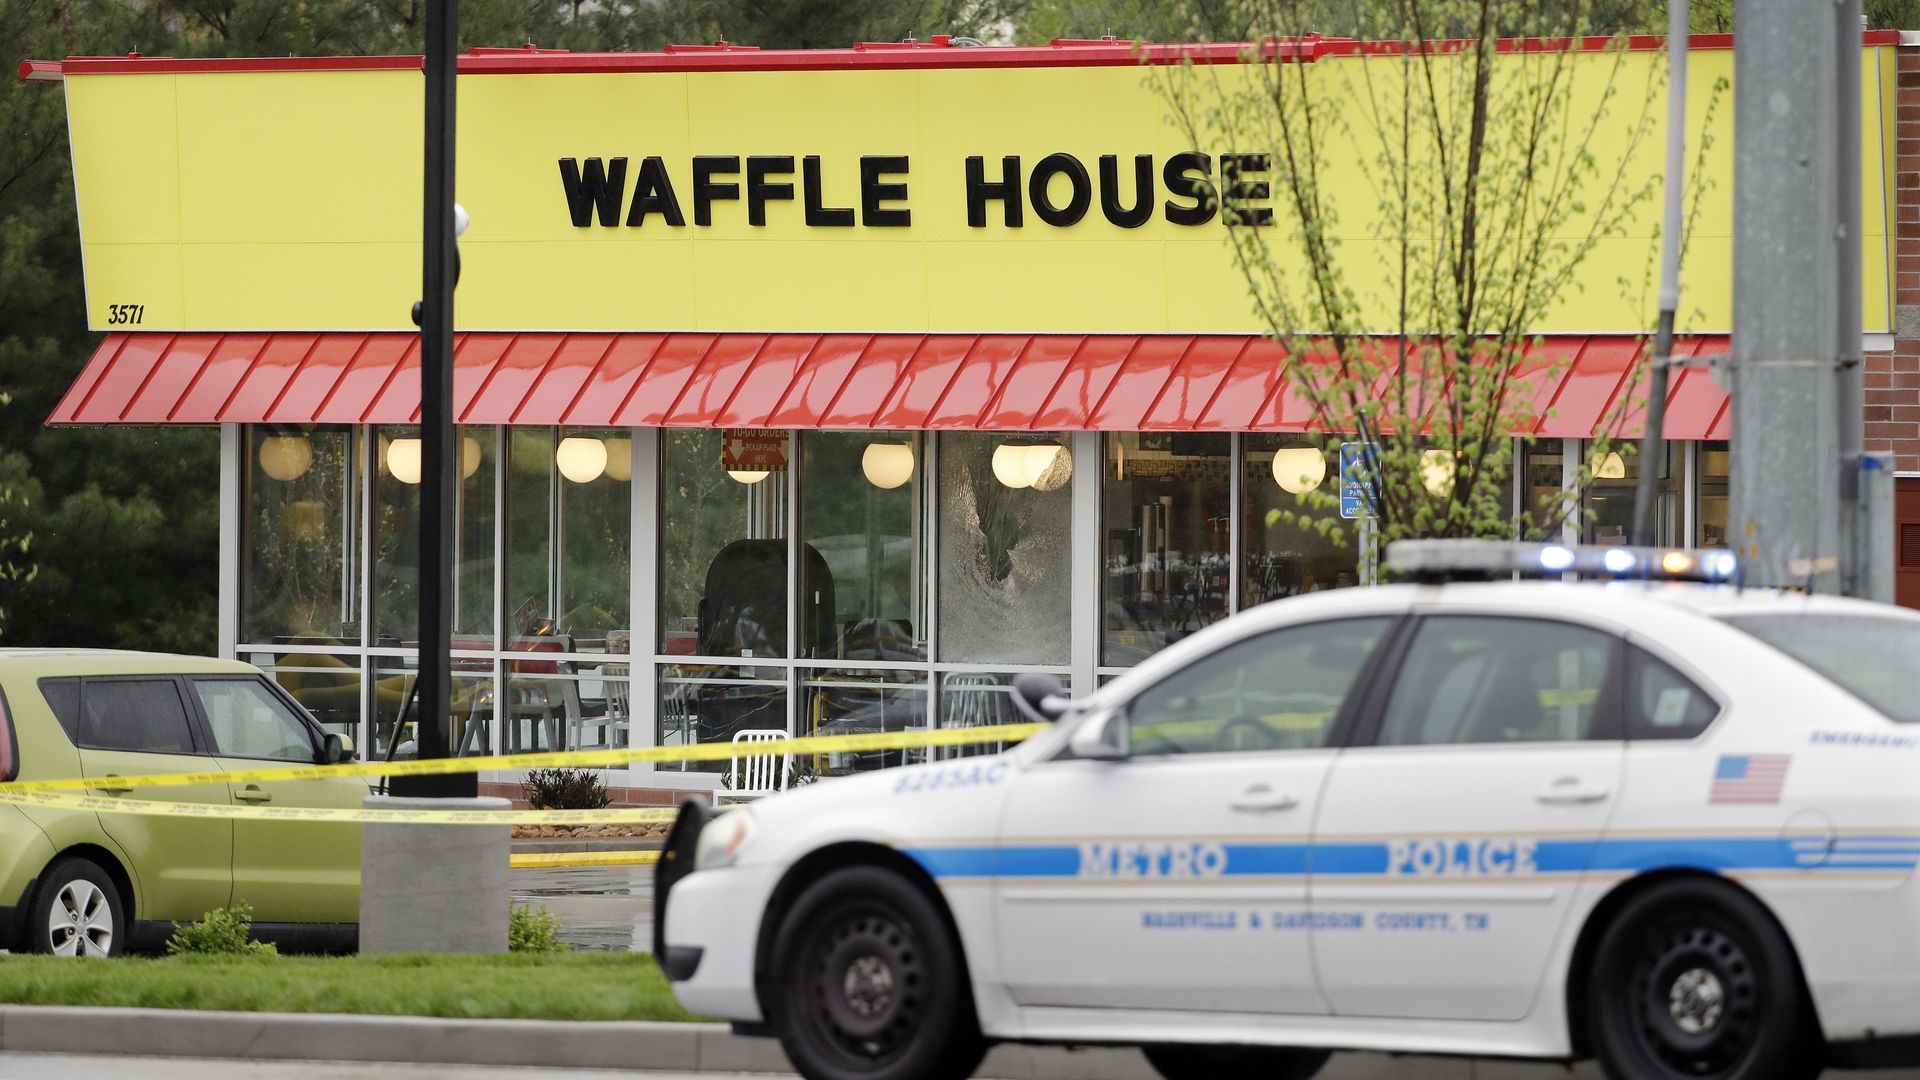 A photo of a waffle house restaurant with a police cruiser parked in front.